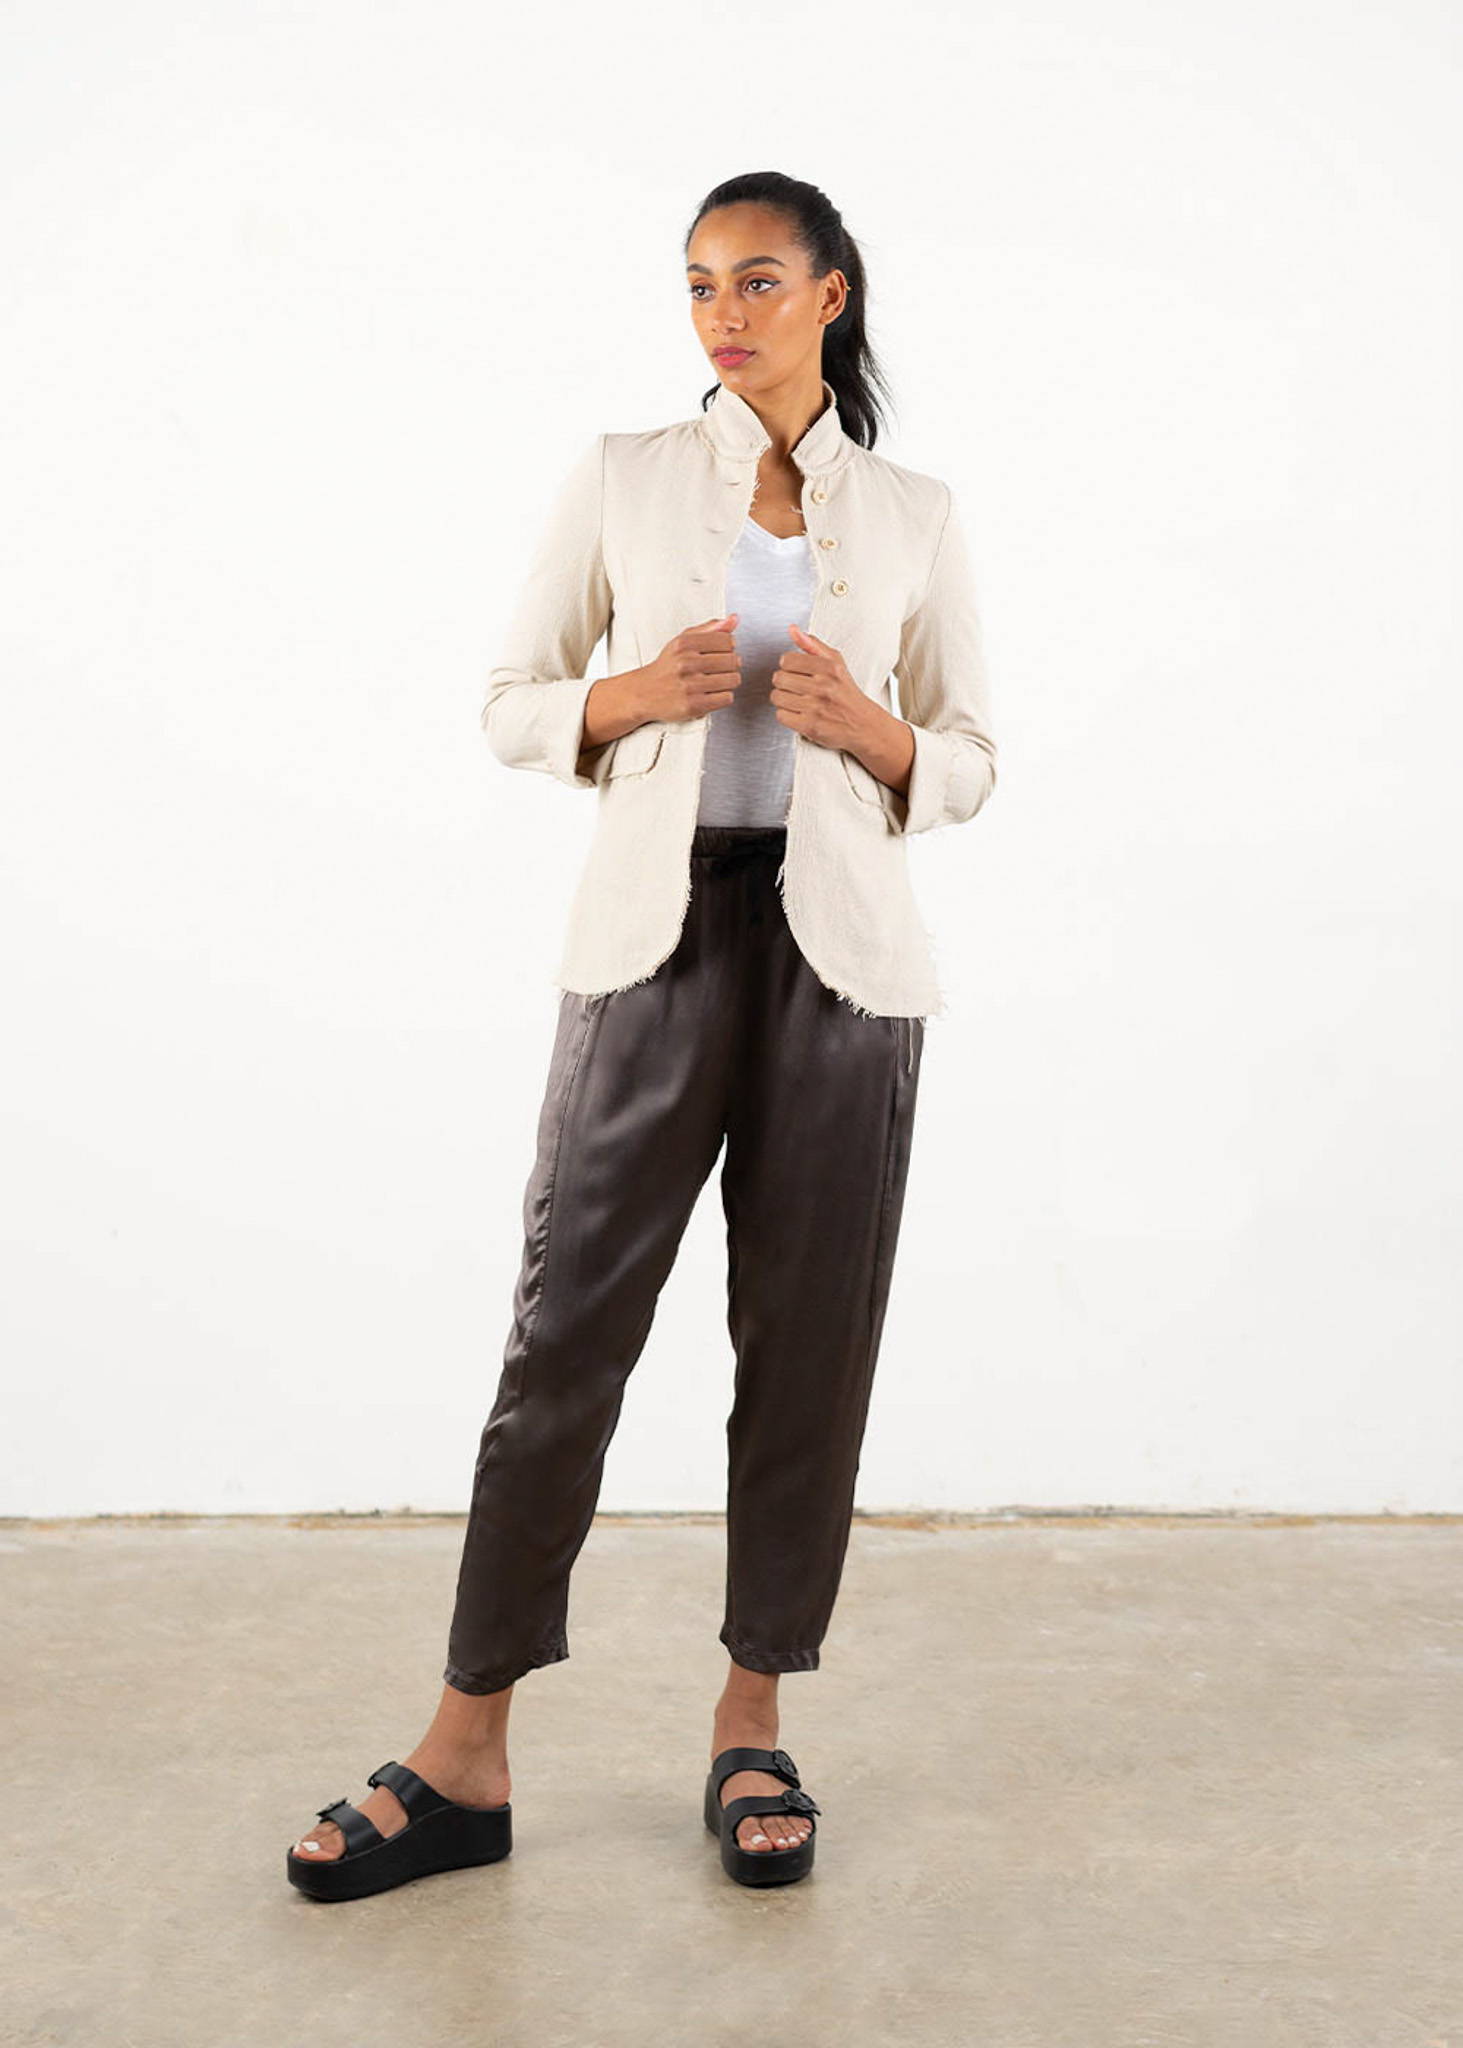 A model wearing a off white, raw hemmed fitted jacket over a white top, dark grey satin trousers and black platform slides.